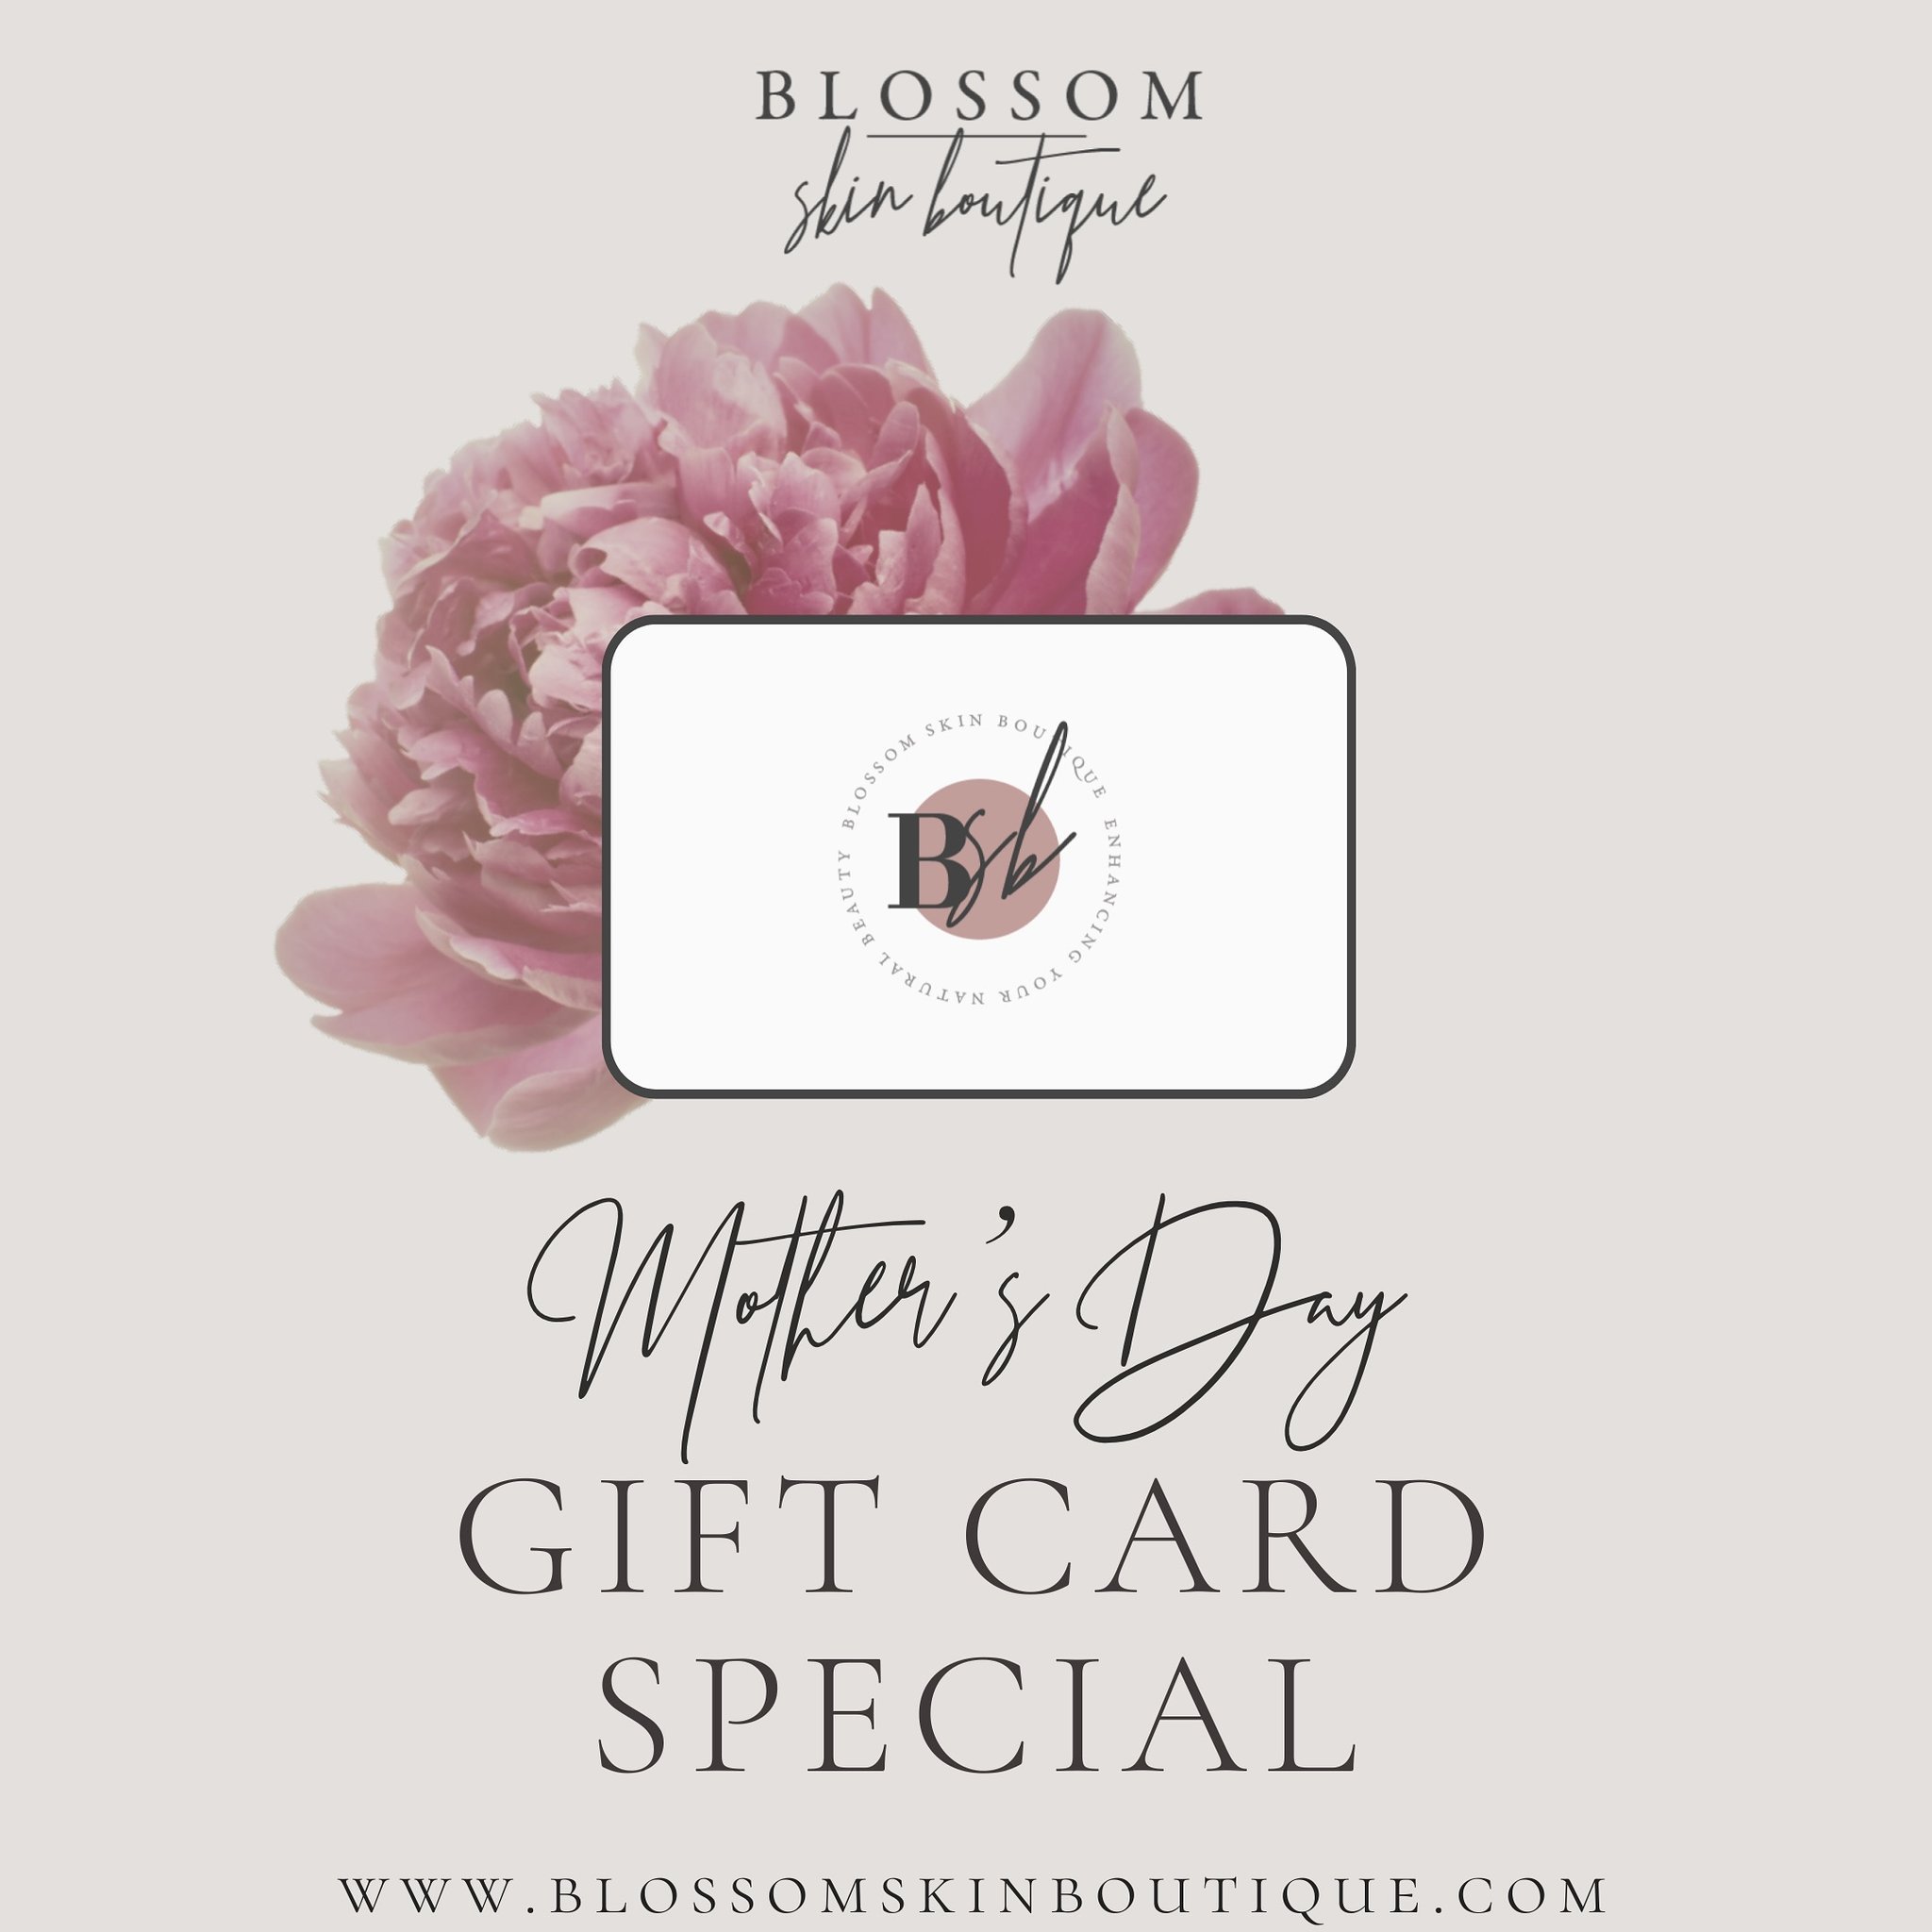 🌱Treat Yourself or Your Mom this Mother&rsquo;s Day❤️

🎁Enjoy 15% off on all gift cards, with custom amounts available

Purchase online or in-store📍

Because We Deserve It!✨

🌱 @blossomskinboutique 
☎️ 647.531.7236
💻www.blossomskinboutique.com
?